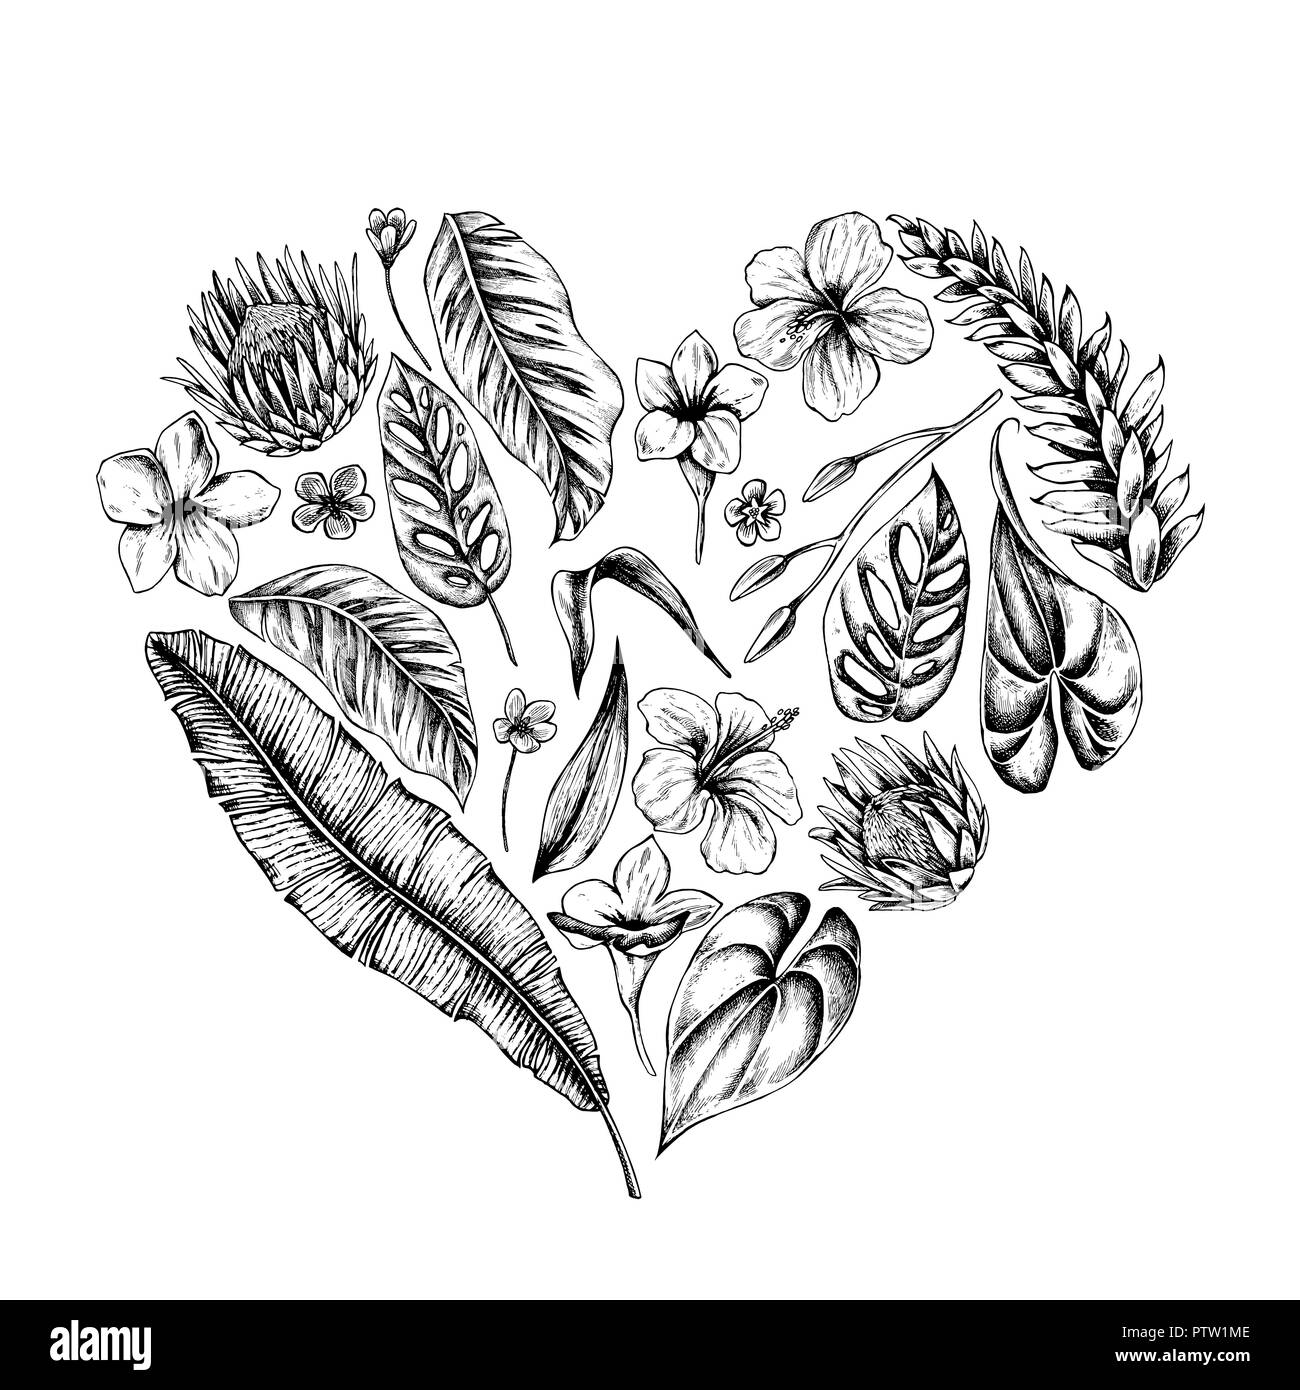 Vector collection of hand drawn tropical plants Stock Vector